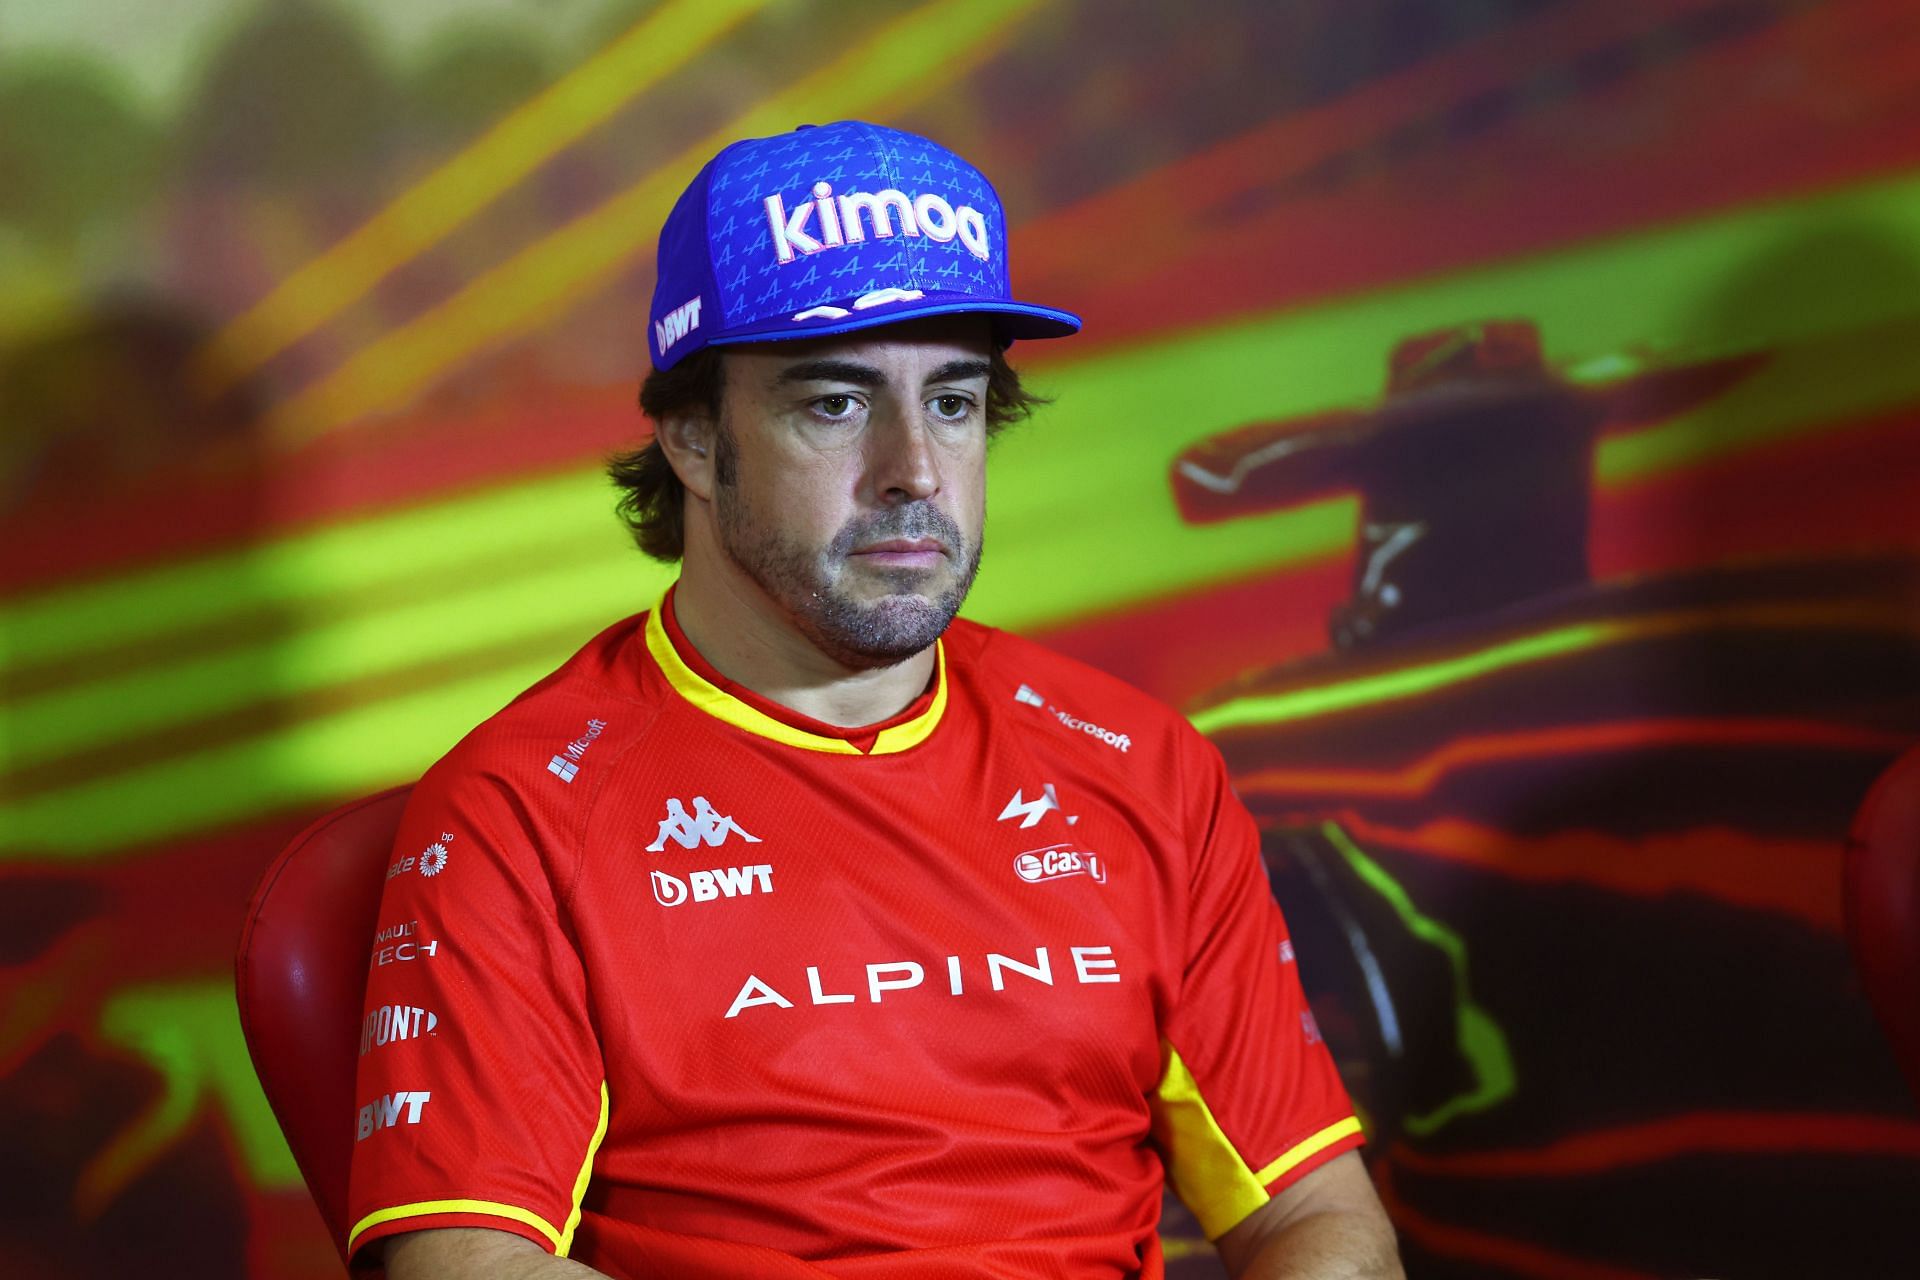 Fernando Alonso at F1 Grand Prix of Spain - Practice